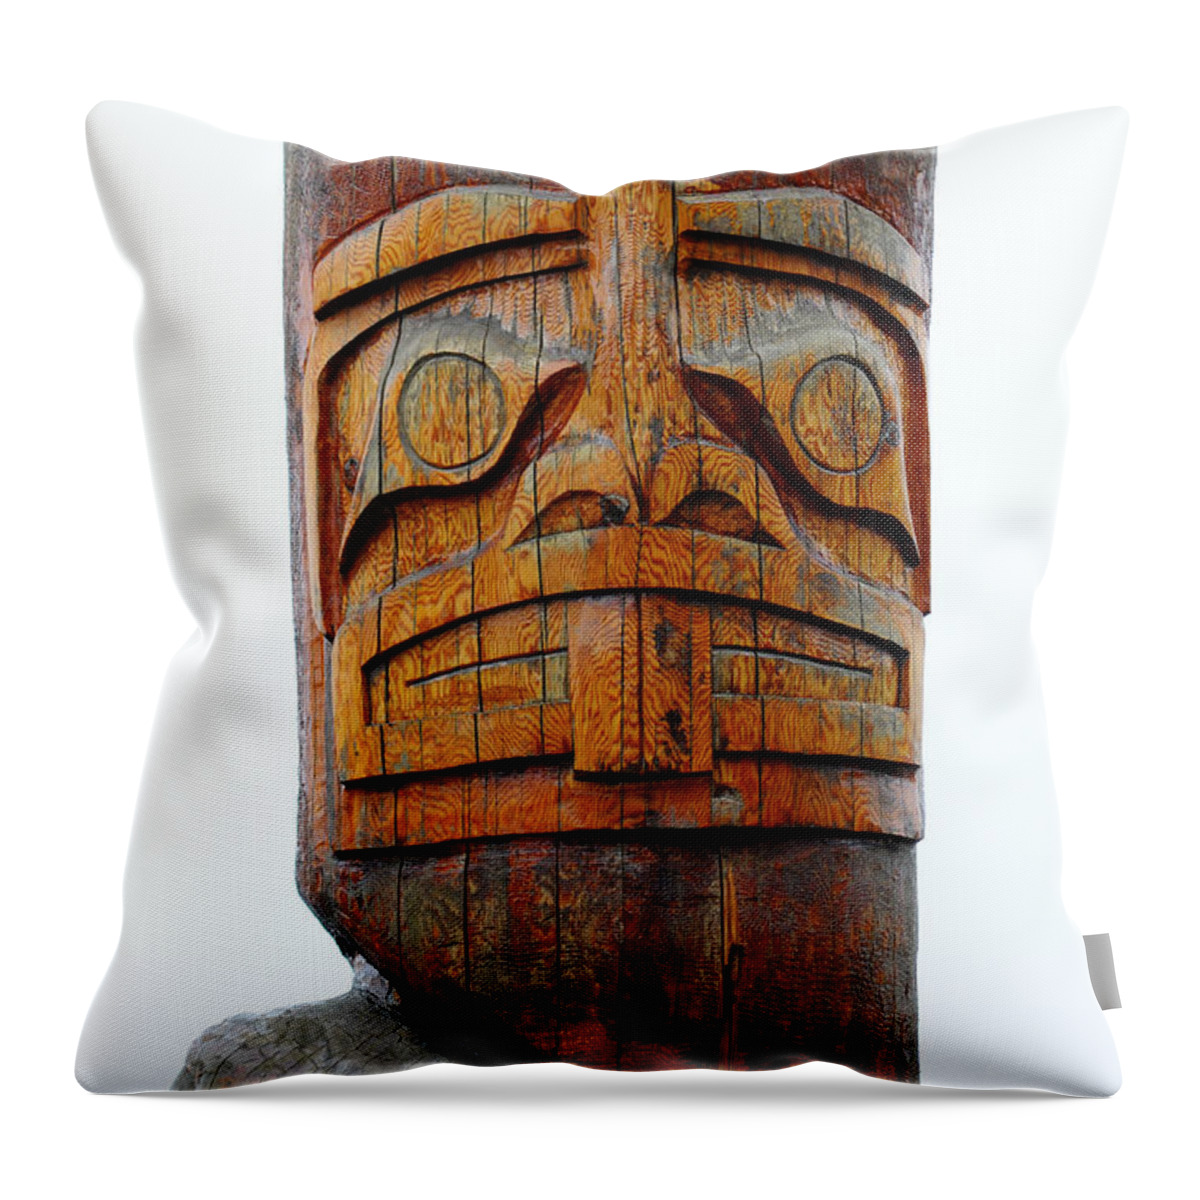 Totem Throw Pillow featuring the photograph The Totem Canada by Vivian Christopher